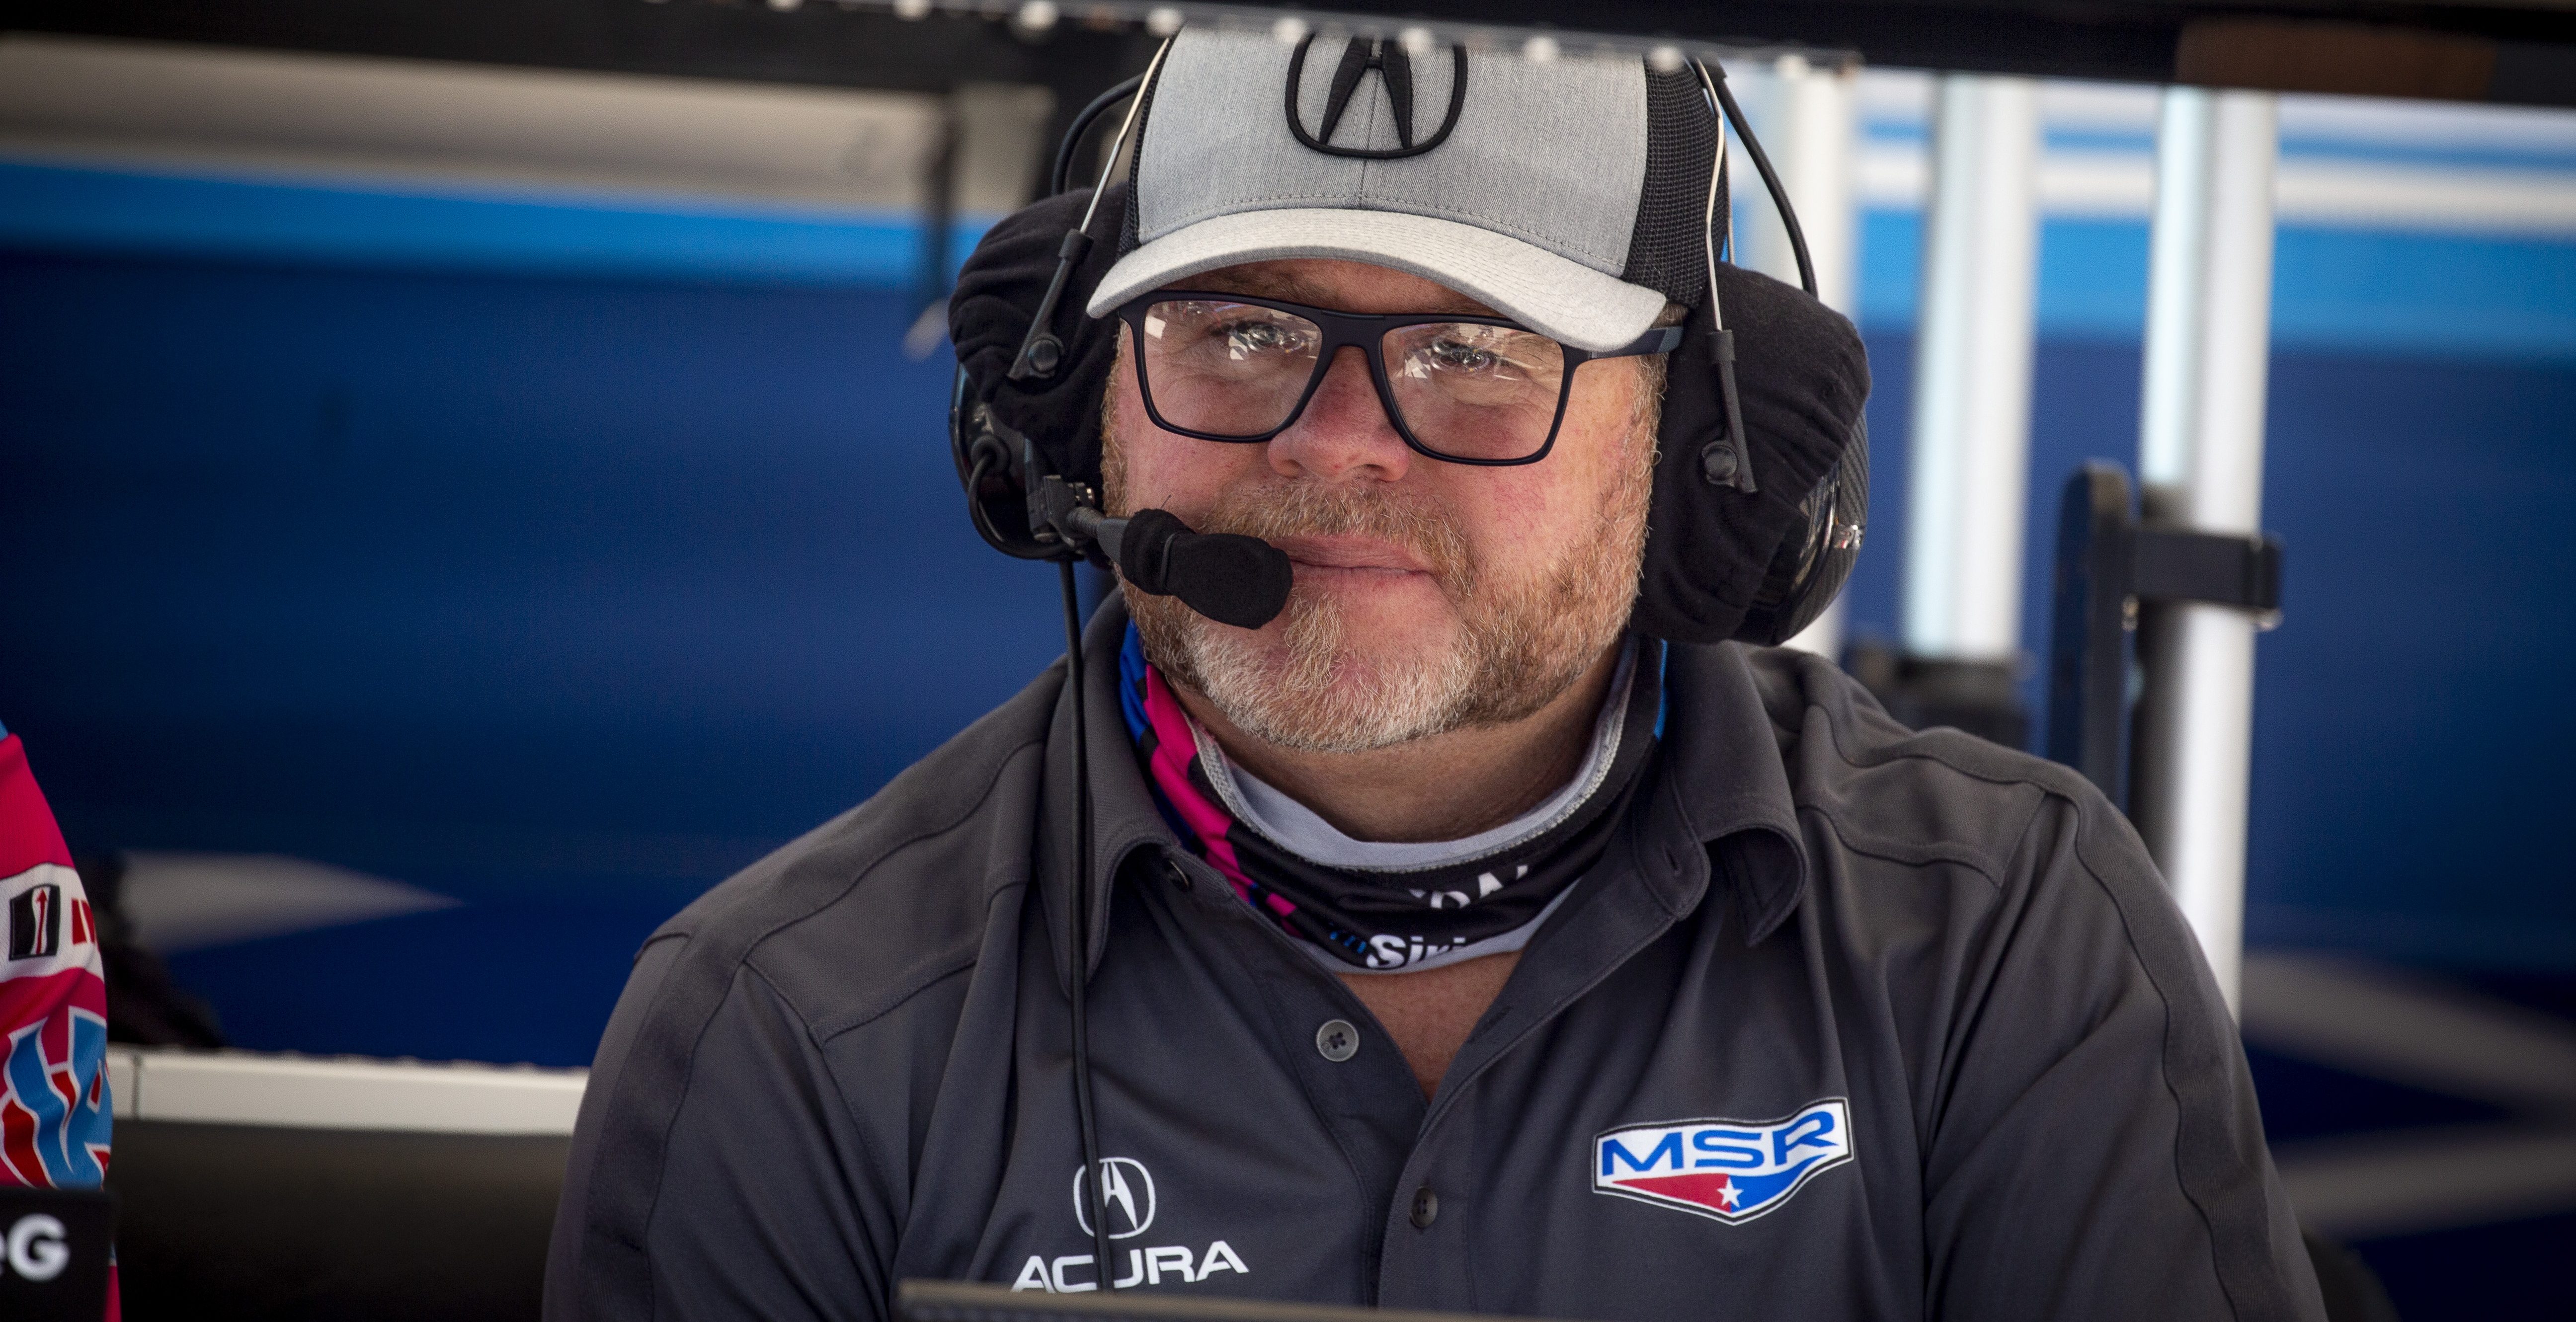 BRASELTON, GA - SEP 4: Car owner Mike Shank watches from the pit box during practice for the Tirerack.com Grand Prix at Michelin Raceway Road Atlanta, Braselton GA, September 4, 2020.